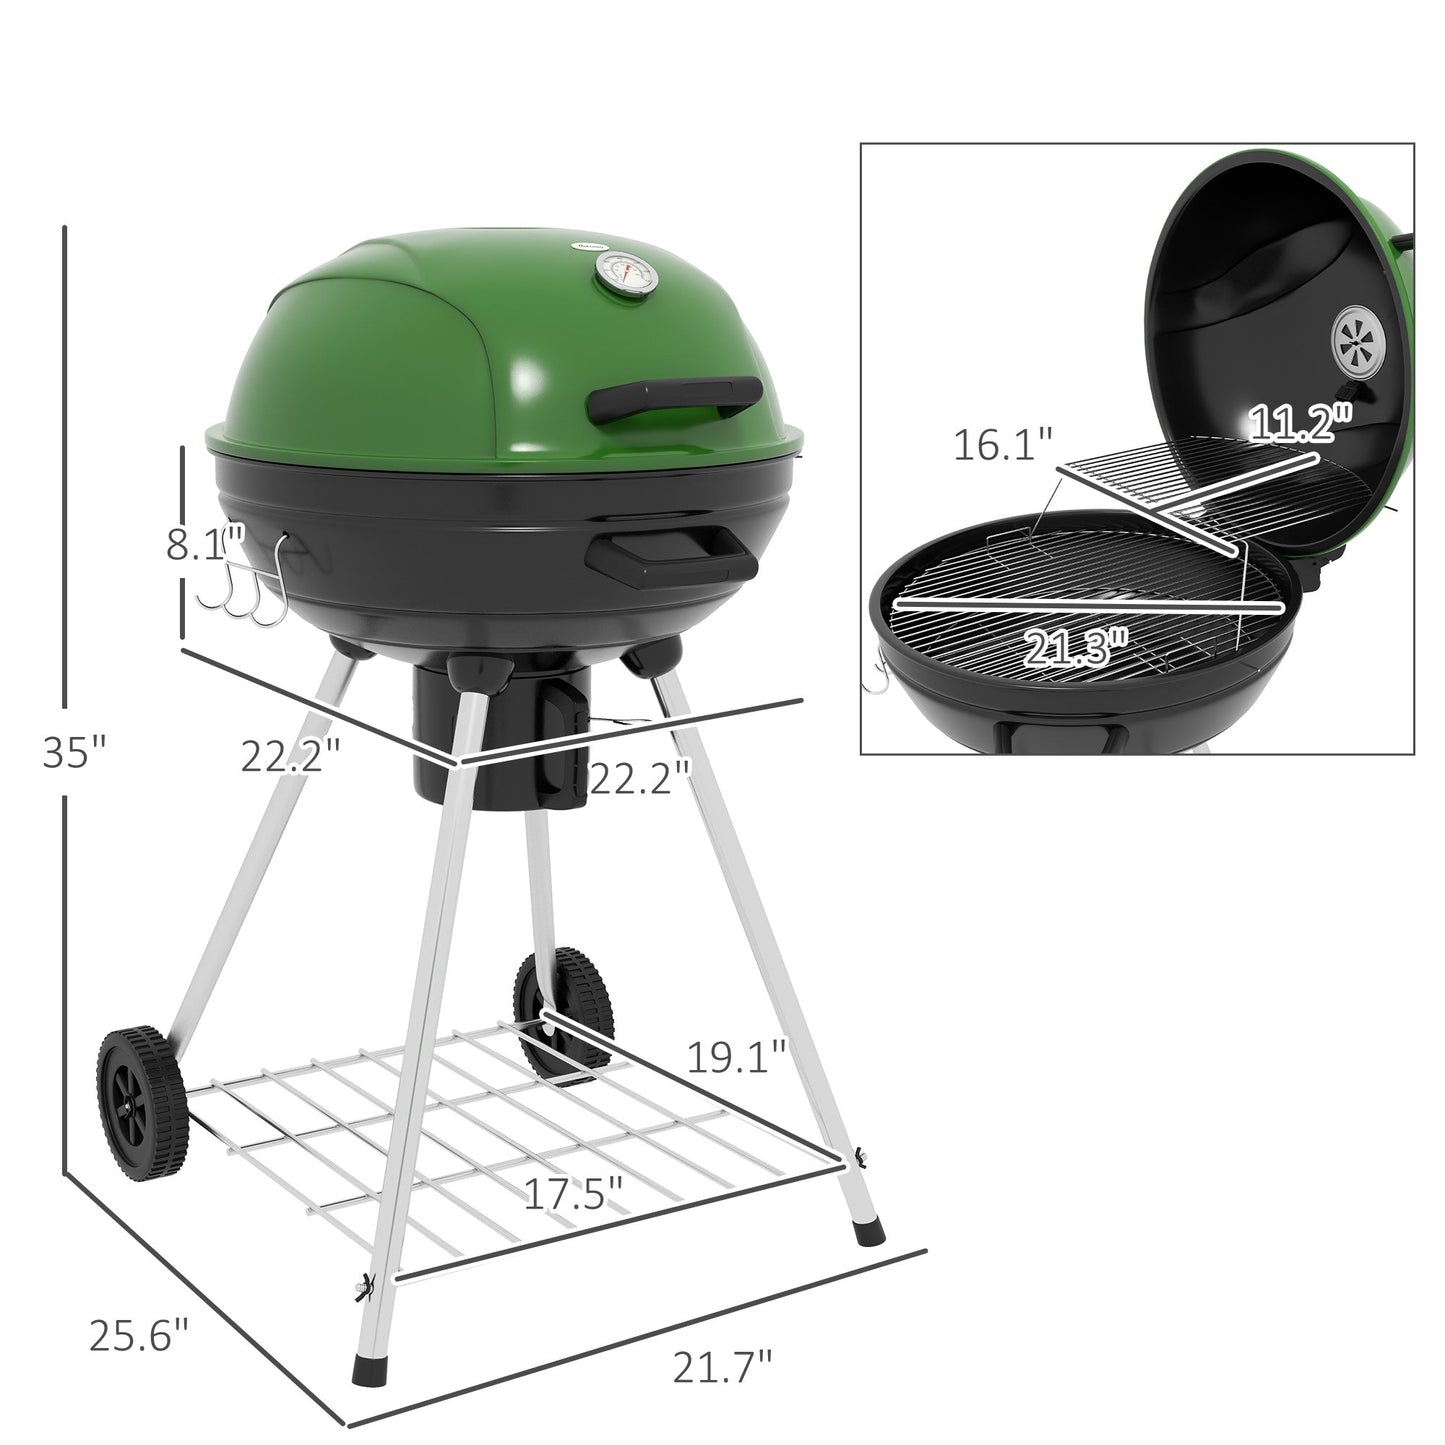 -Outsunny 21" Kettle CharcoalÂ BBQÂ GrillÂ BarbecueÂ Smoker with 360 sq.in. Cooking Area, Wheels, Ash Catcher, Green - Outdoor Style Company